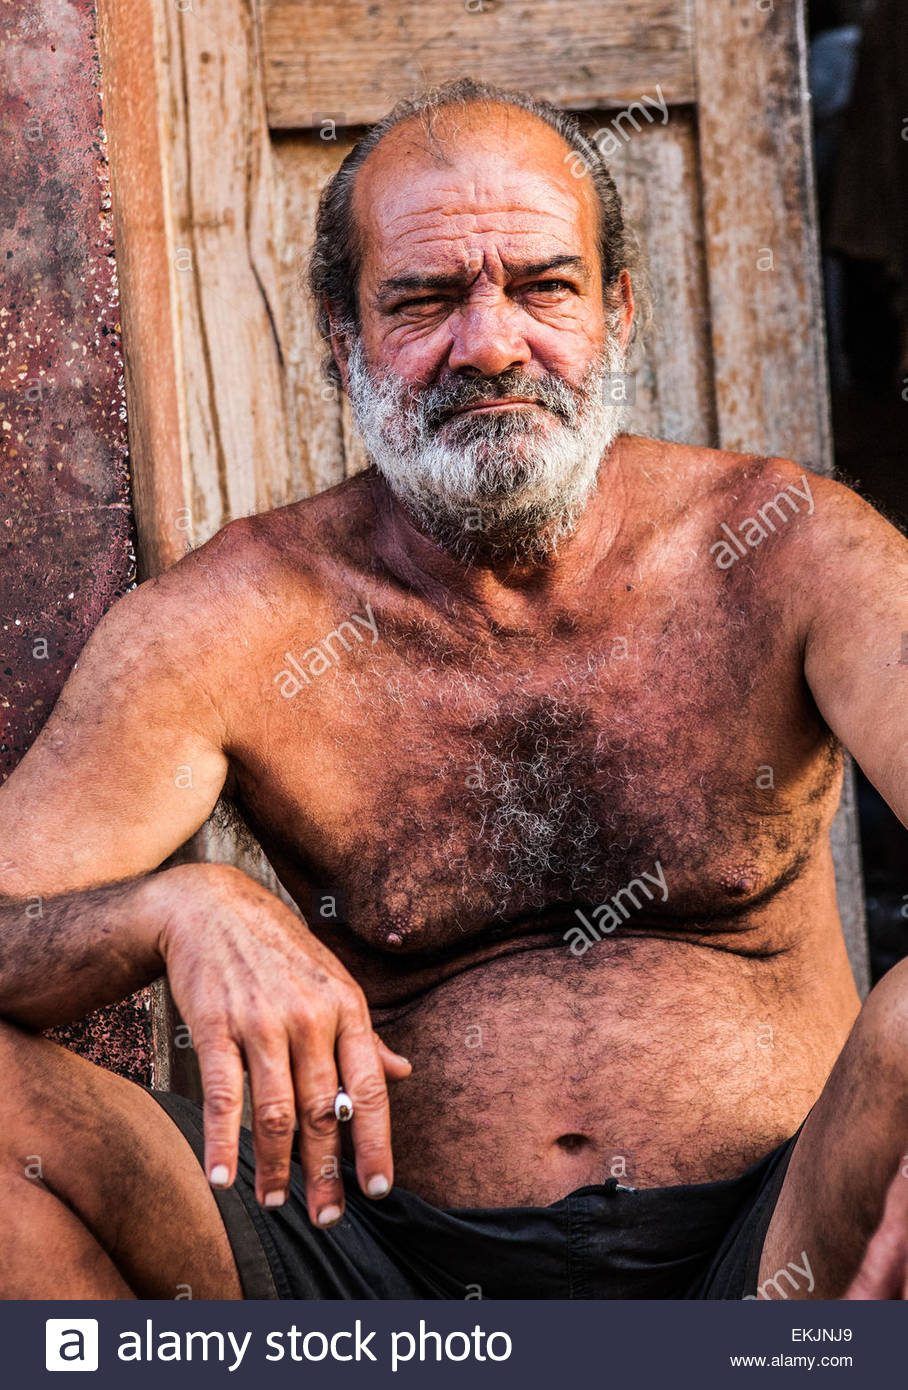 best of Hairy pic Hairy older man